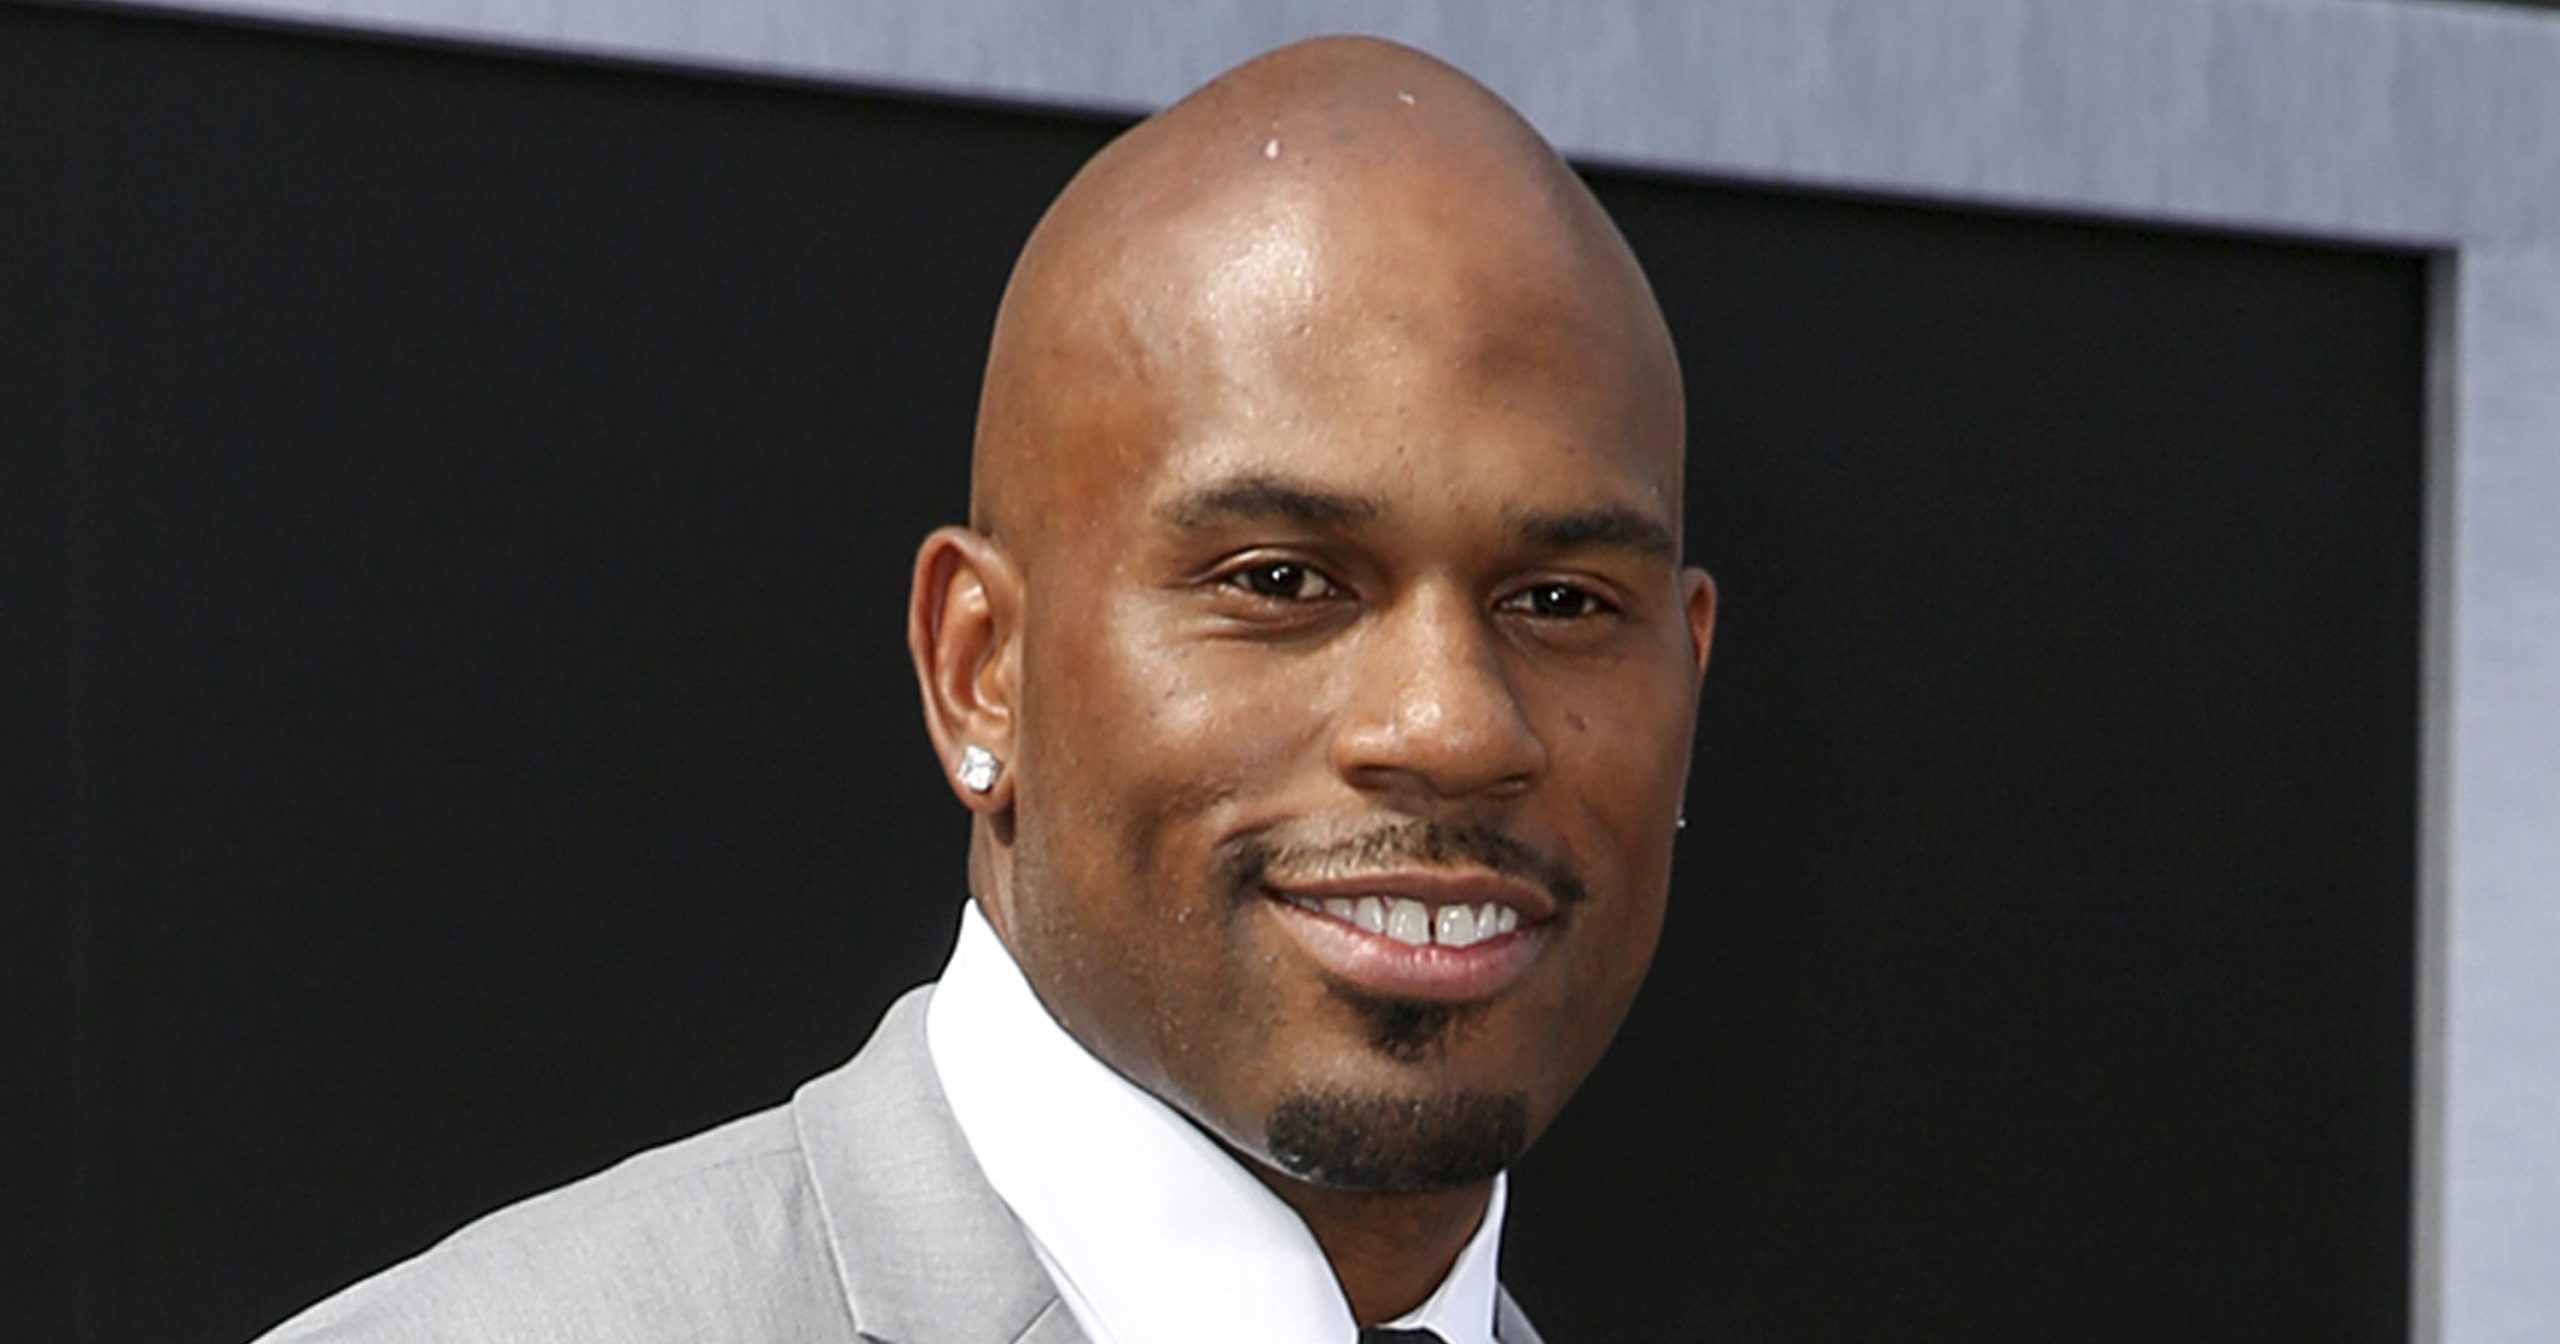 In this June 28, 2015, file photo, WWE wrestler Shad Gaspard arriving at the Los Angeles premiere of "Terminator Genisys" at the Dolby Theatre in Los Angeles.